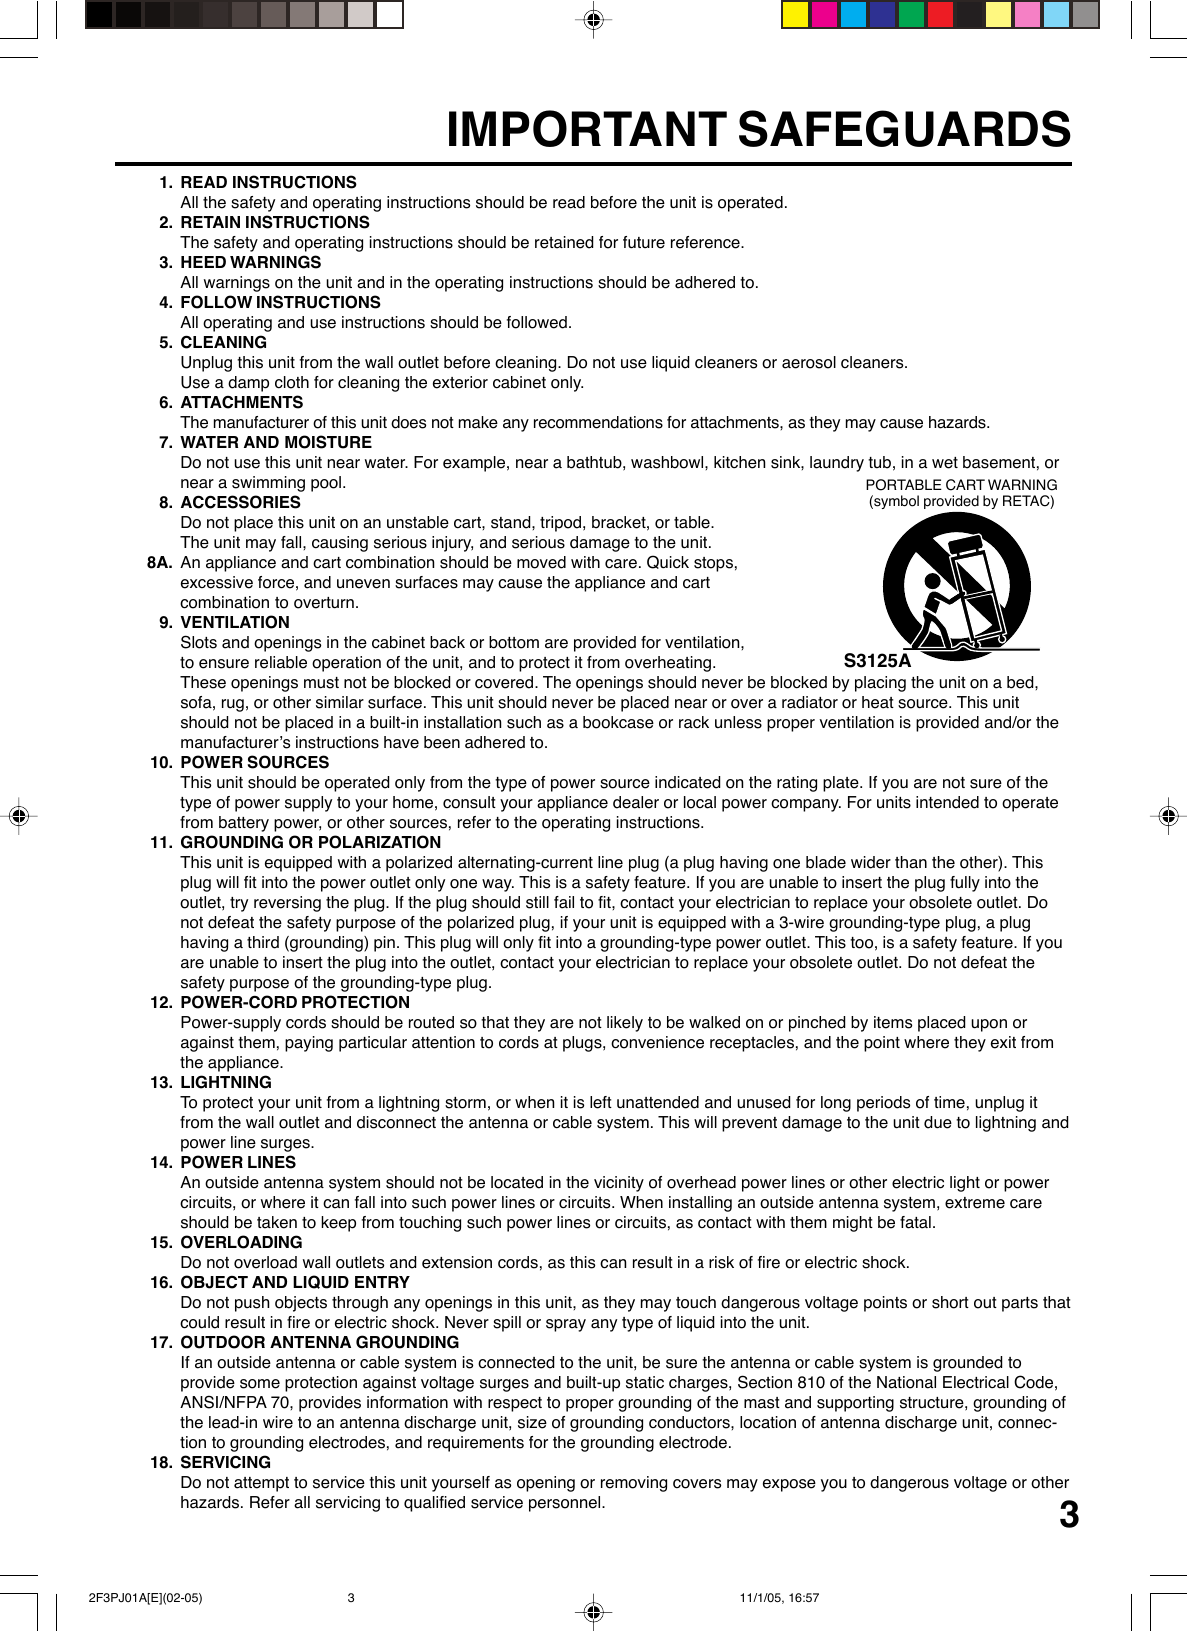 31. READ INSTRUCTIONSAll the safety and operating instructions should be read before the unit is operated.2. RETAIN INSTRUCTIONSThe safety and operating instructions should be retained for future reference.3. HEED WARNINGSAll warnings on the unit and in the operating instructions should be adhered to.4. FOLLOW INSTRUCTIONSAll operating and use instructions should be followed.5. CLEANINGUnplug this unit from the wall outlet before cleaning. Do not use liquid cleaners or aerosol cleaners.Use a damp cloth for cleaning the exterior cabinet only.6. ATTACHMENTSThe manufacturer of this unit does not make any recommendations for attachments, as they may cause hazards.7. WATER AND MOISTUREDo not use this unit near water. For example, near a bathtub, washbowl, kitchen sink, laundry tub, in a wet basement, ornear a swimming pool.8. ACCESSORIESDo not place this unit on an unstable cart, stand, tripod, bracket, or table.The unit may fall, causing serious injury, and serious damage to the unit.8A. An appliance and cart combination should be moved with care. Quick stops,excessive force, and uneven surfaces may cause the appliance and cartcombination to overturn.9. VENTILATIONSlots and openings in the cabinet back or bottom are provided for ventilation,to ensure reliable operation of the unit, and to protect it from overheating.These openings must not be blocked or covered. The openings should never be blocked by placing the unit on a bed,sofa, rug, or other similar surface. This unit should never be placed near or over a radiator or heat source. This unitshould not be placed in a built-in installation such as a bookcase or rack unless proper ventilation is provided and/or themanufacturer’s instructions have been adhered to.10. POWER SOURCESThis unit should be operated only from the type of power source indicated on the rating plate. If you are not sure of thetype of power supply to your home, consult your appliance dealer or local power company. For units intended to operatefrom battery power, or other sources, refer to the operating instructions.11. GROUNDING OR POLARIZATIONThis unit is equipped with a polarized alternating-current line plug (a plug having one blade wider than the other). Thisplug will fit into the power outlet only one way. This is a safety feature. If you are unable to insert the plug fully into theoutlet, try reversing the plug. If the plug should still fail to fit, contact your electrician to replace your obsolete outlet. Donot defeat the safety purpose of the polarized plug, if your unit is equipped with a 3-wire grounding-type plug, a plughaving a third (grounding) pin. This plug will only fit into a grounding-type power outlet. This too, is a safety feature. If youare unable to insert the plug into the outlet, contact your electrician to replace your obsolete outlet. Do not defeat thesafety purpose of the grounding-type plug.12. POWER-CORD PROTECTIONPower-supply cords should be routed so that they are not likely to be walked on or pinched by items placed upon oragainst them, paying particular attention to cords at plugs, convenience receptacles, and the point where they exit fromthe appliance.13. LIGHTNINGTo protect your unit from a lightning storm, or when it is left unattended and unused for long periods of time, unplug itfrom the wall outlet and disconnect the antenna or cable system. This will prevent damage to the unit due to lightning andpower line surges.14. POWER LINESAn outside antenna system should not be located in the vicinity of overhead power lines or other electric light or powercircuits, or where it can fall into such power lines or circuits. When installing an outside antenna system, extreme careshould be taken to keep from touching such power lines or circuits, as contact with them might be fatal.15. OVERLOADINGDo not overload wall outlets and extension cords, as this can result in a risk of fire or electric shock.16. OBJECT AND LIQUID ENTRYDo not push objects through any openings in this unit, as they may touch dangerous voltage points or short out parts thatcould result in fire or electric shock. Never spill or spray any type of liquid into the unit.17. OUTDOOR ANTENNA GROUNDINGIf an outside antenna or cable system is connected to the unit, be sure the antenna or cable system is grounded toprovide some protection against voltage surges and built-up static charges, Section 810 of the National Electrical Code,ANSI/NFPA 70, provides information with respect to proper grounding of the mast and supporting structure, grounding ofthe lead-in wire to an antenna discharge unit, size of grounding conductors, location of antenna discharge unit, connec-tion to grounding electrodes, and requirements for the grounding electrode.18. SERVICINGDo not attempt to service this unit yourself as opening or removing covers may expose you to dangerous voltage or otherhazards. Refer all servicing to qualified service personnel.S3125APORTABLE CART WARNING(symbol provided by RETAC)IMPORTANT SAFEGUARDS 2F3PJ01A[E](02-05) 11/1/05, 16:573